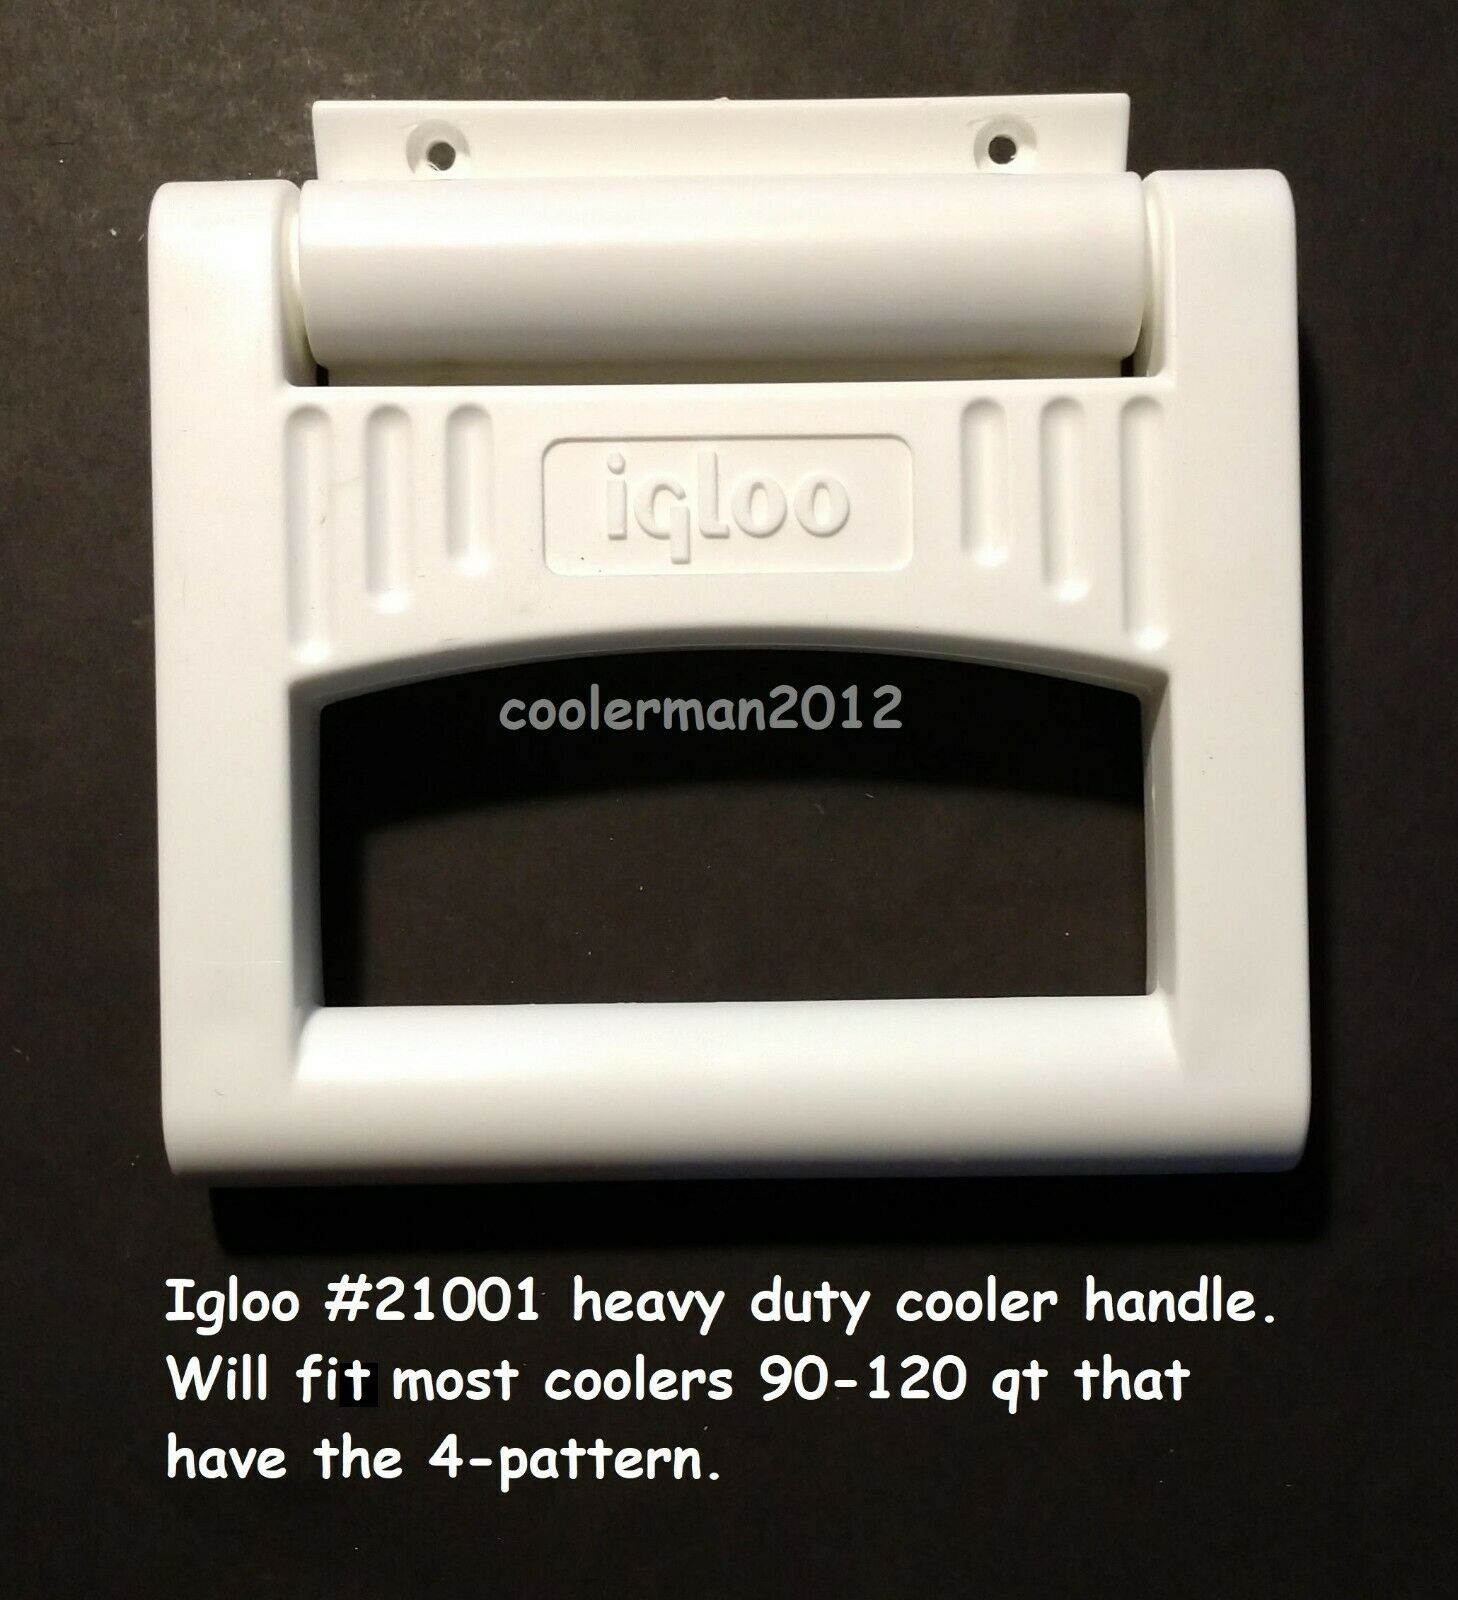 New # 21001 Genuine 90-100 Qt Igloo Cooler Repair Replacement Heavy Duty Handle